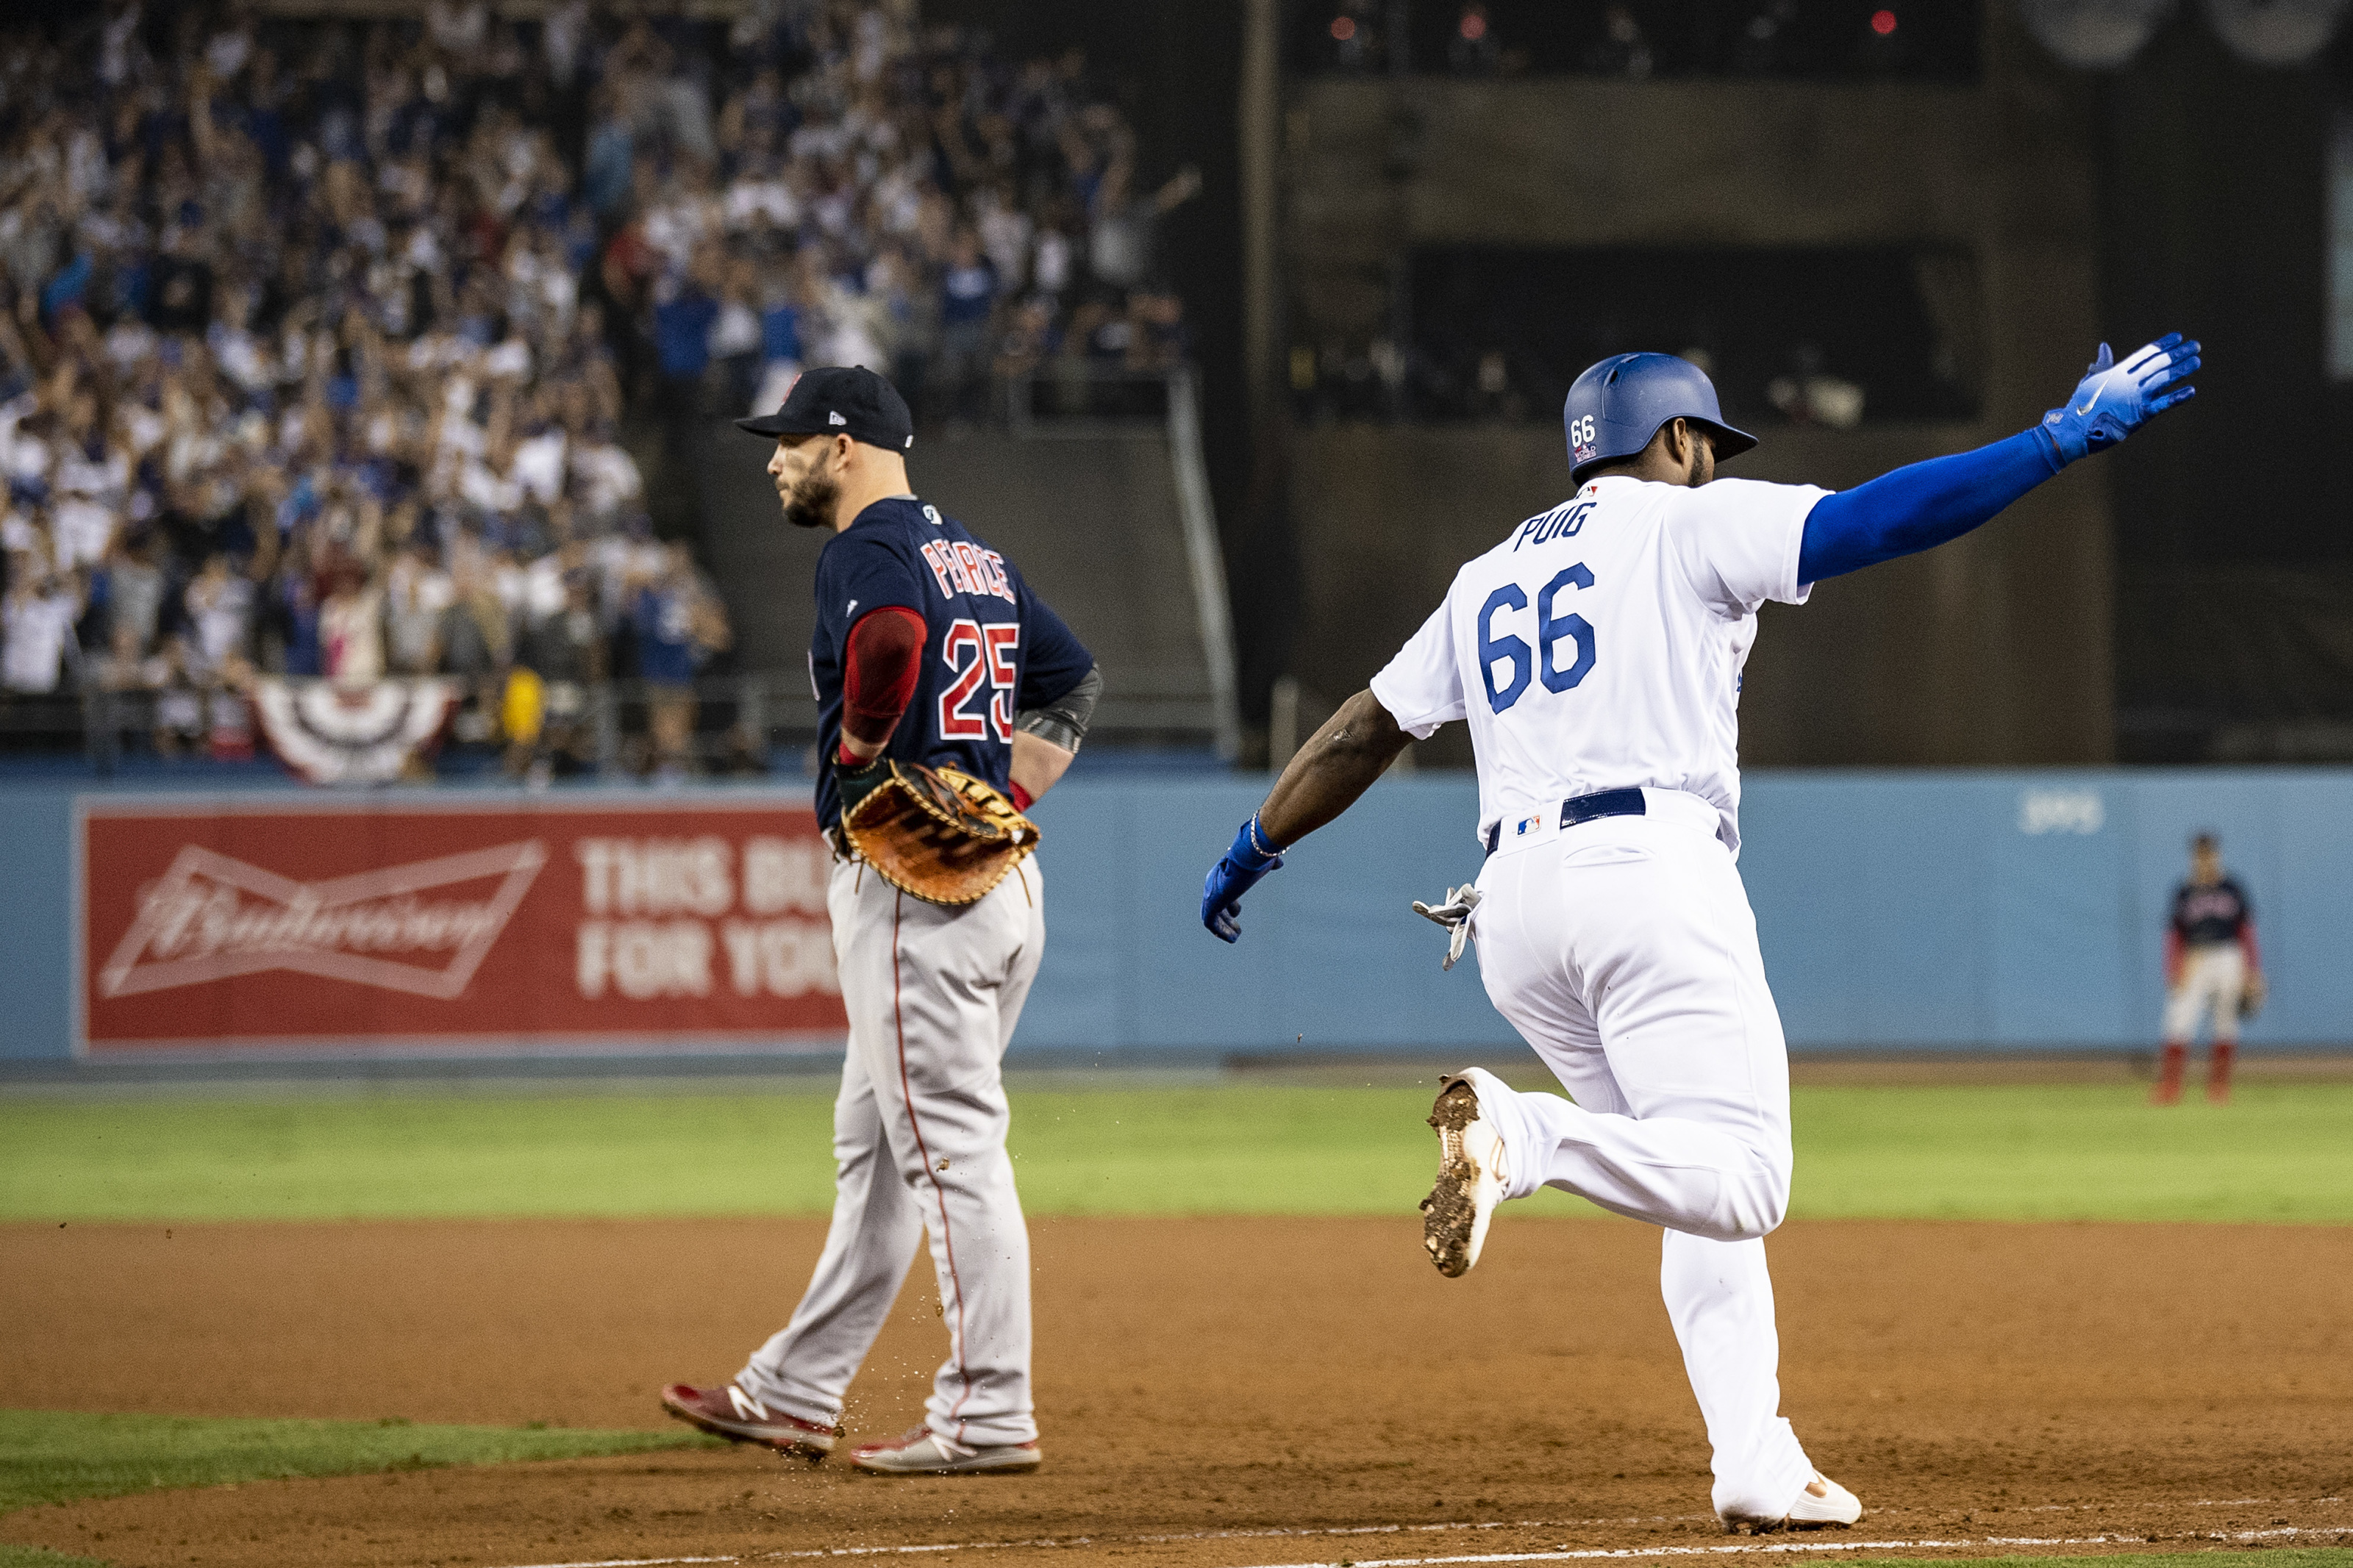 Yasiel Puig to be recalled by Dodgers